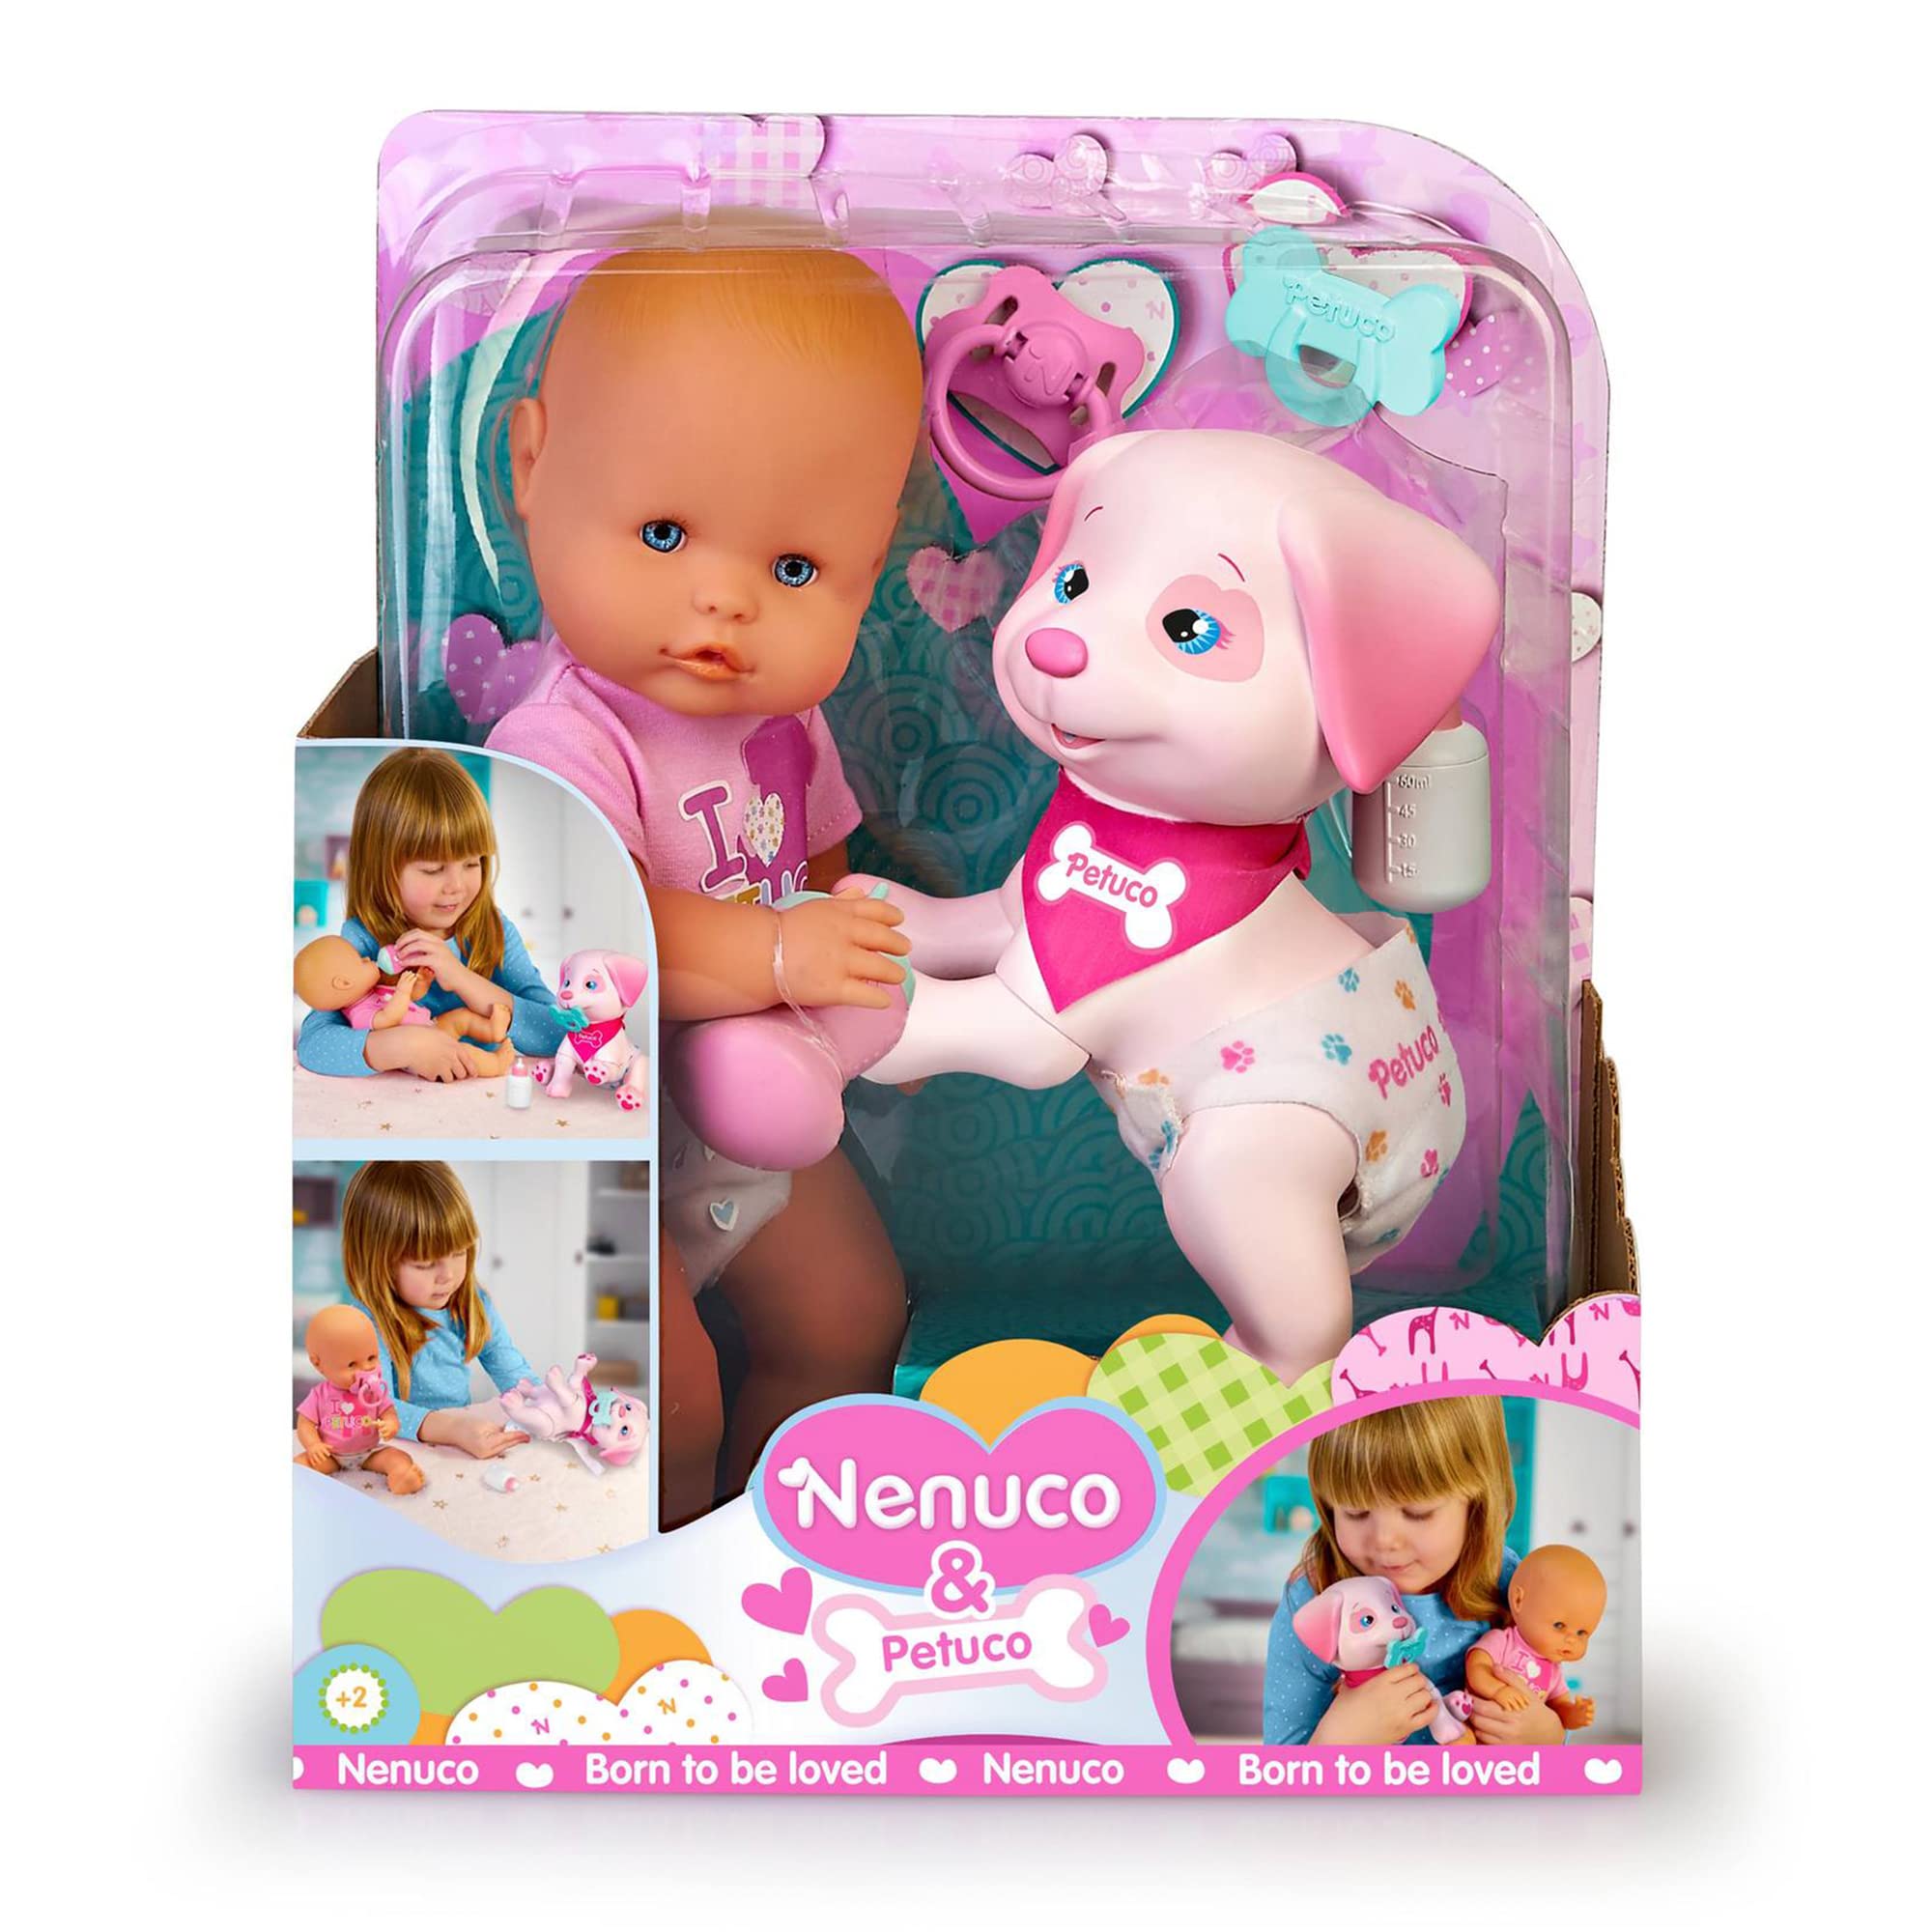 Nenuco & Petuco Baby Doll with Companion Puppy, Accessories for Baby and Puppy, 14